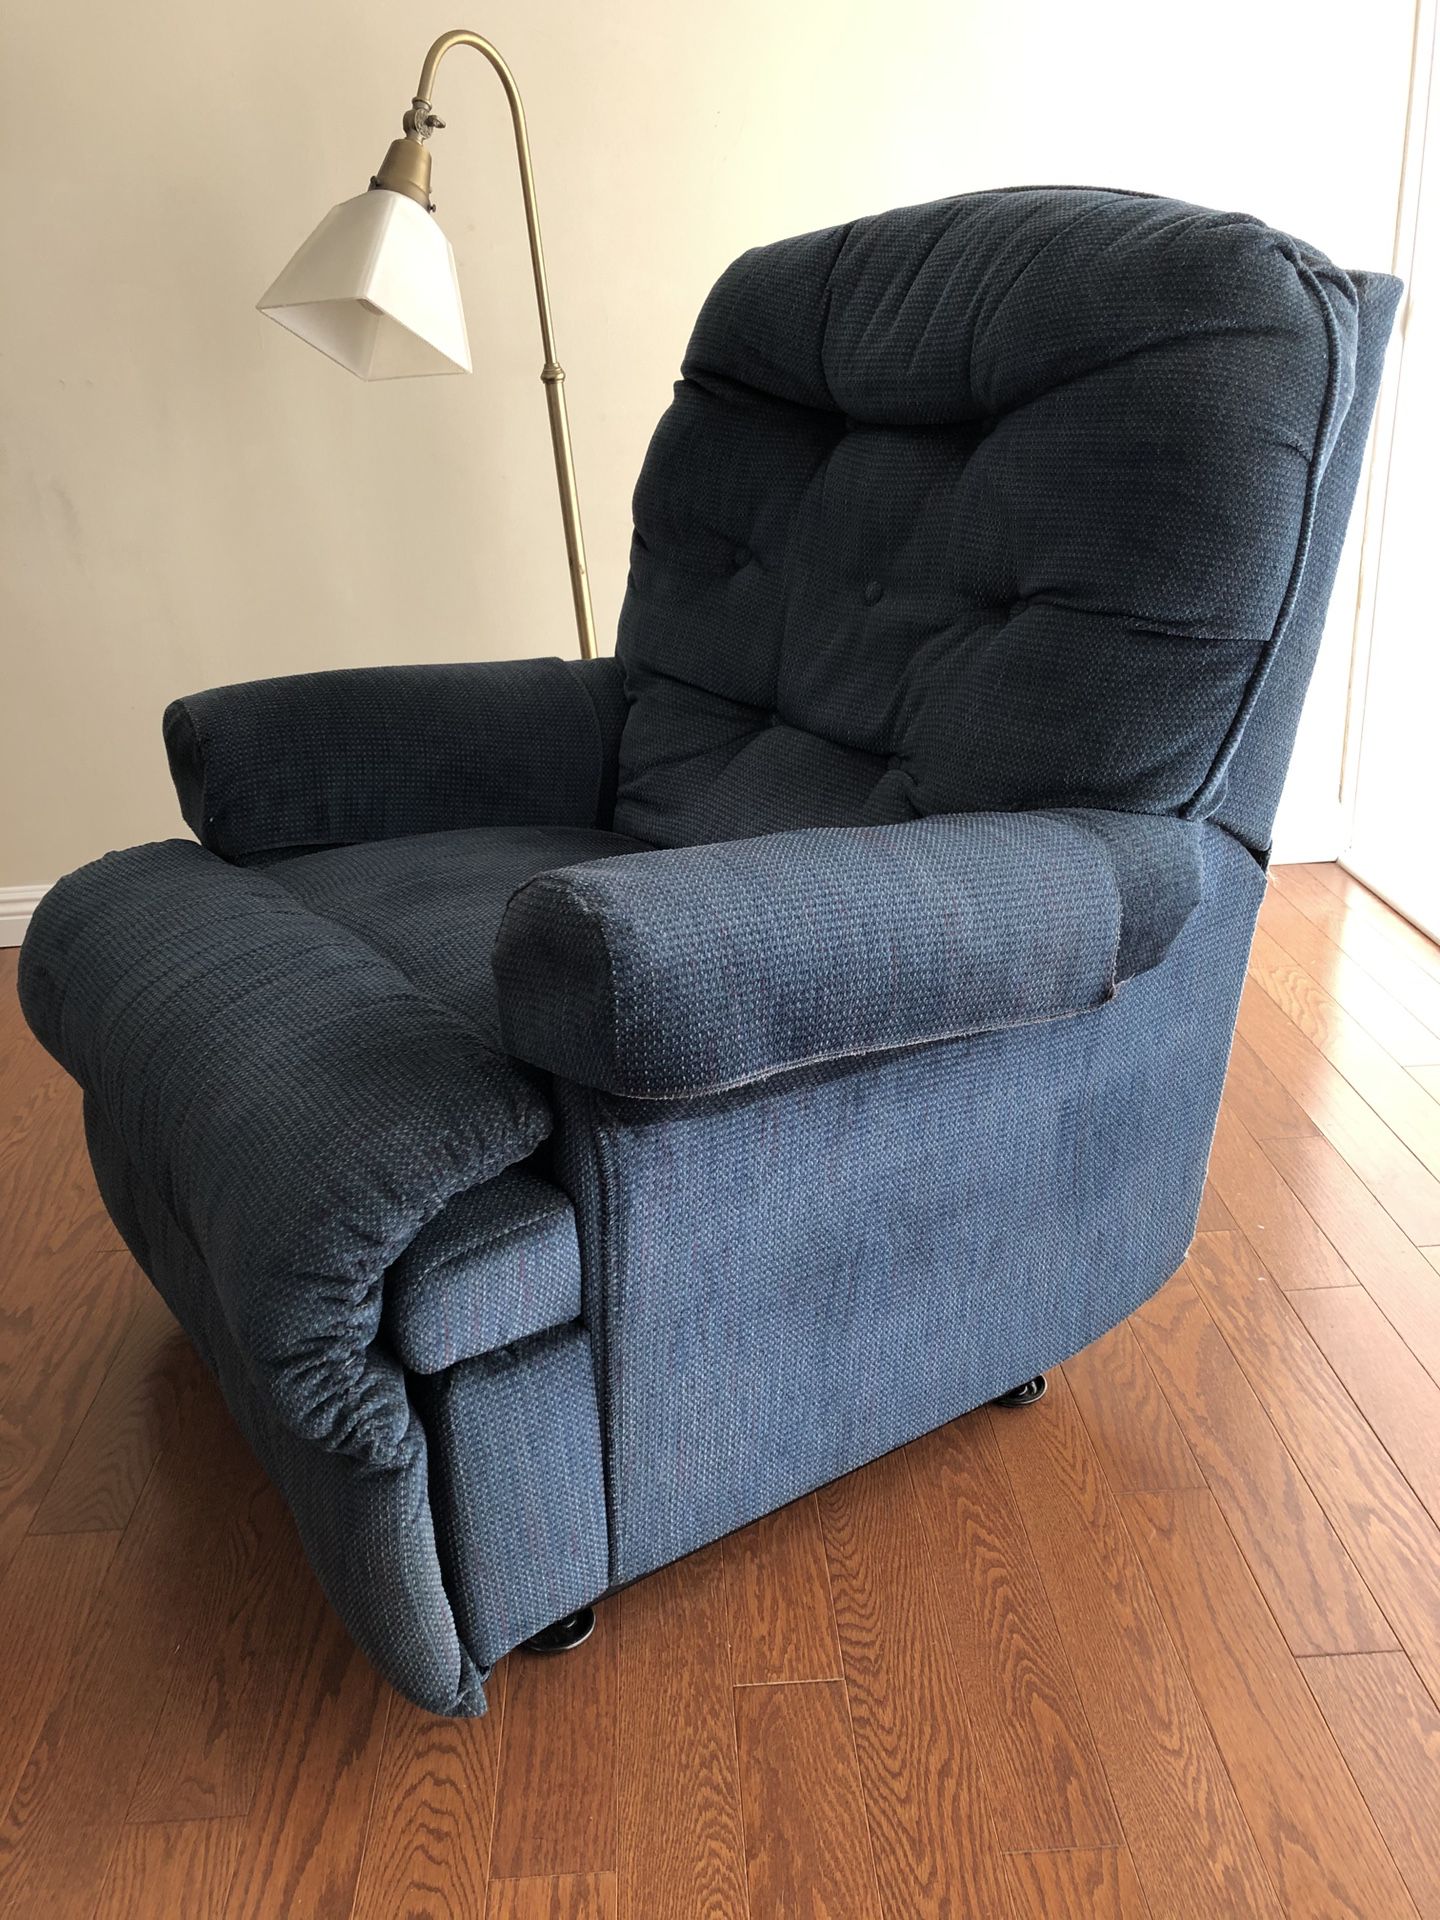 2 recliner chairs. Sold separately